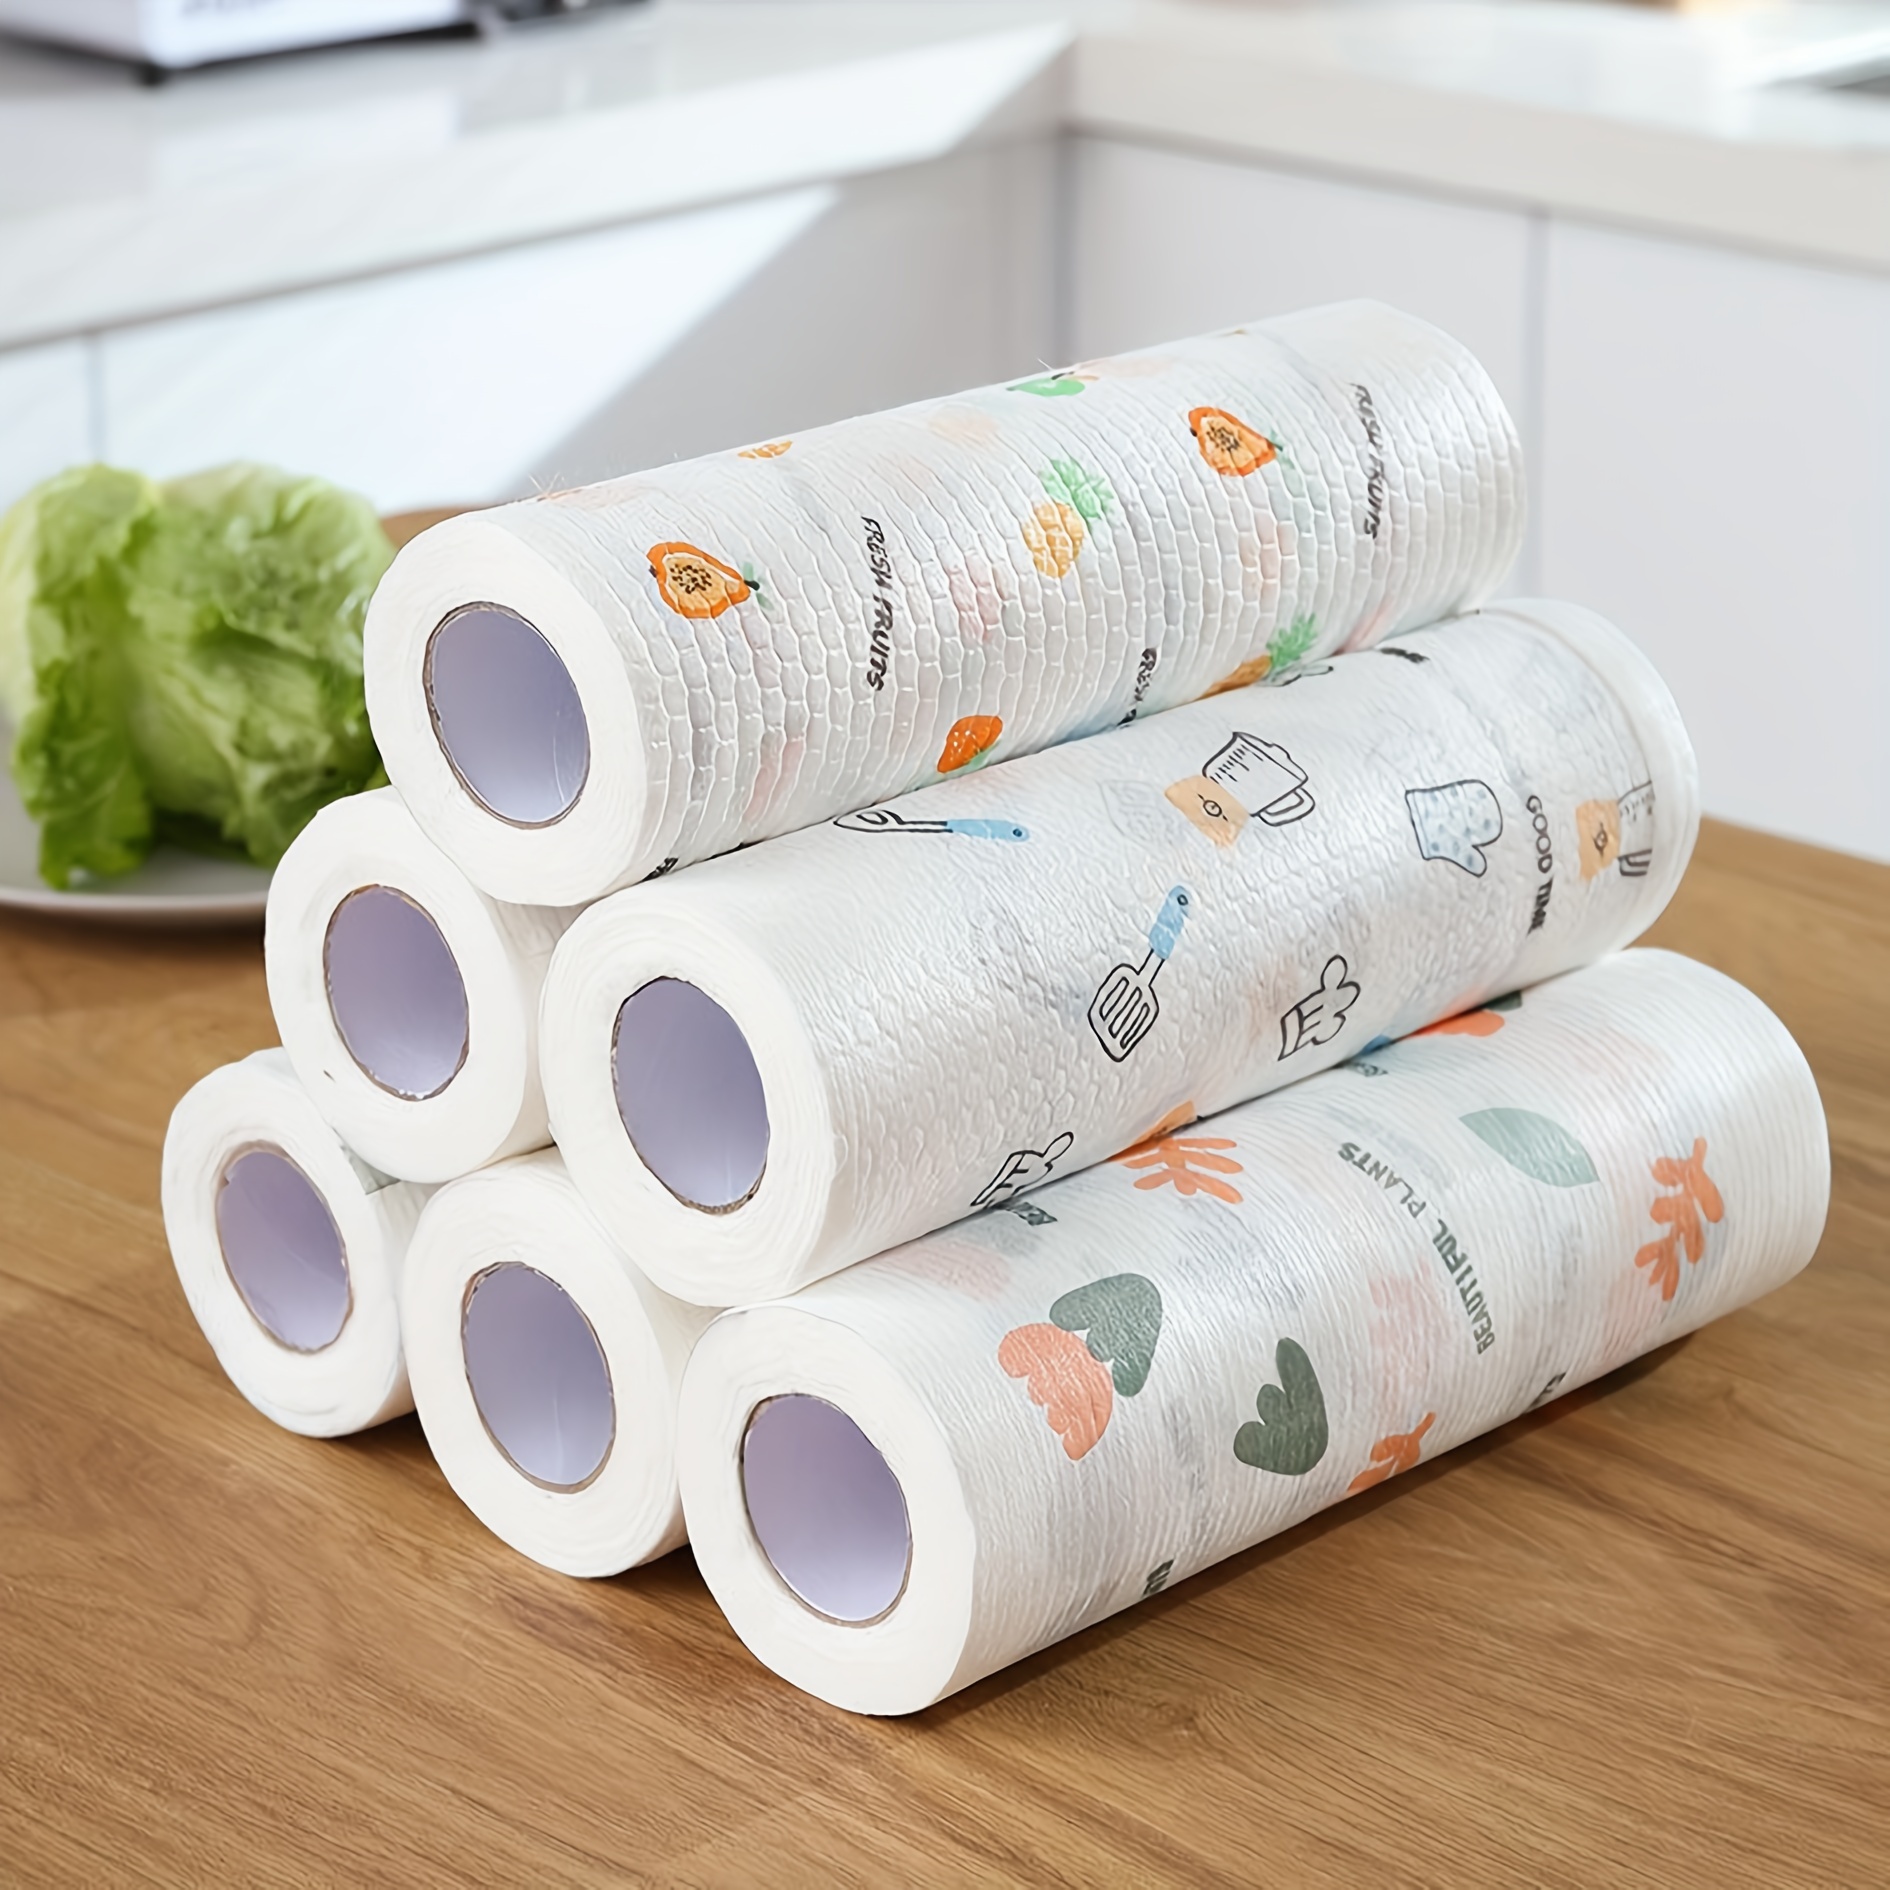 Disposable Breakpoint Non-woven Kitchen Towels Cleaning Cloth 50pcs in 1  Roll Dish Wipes Cocina